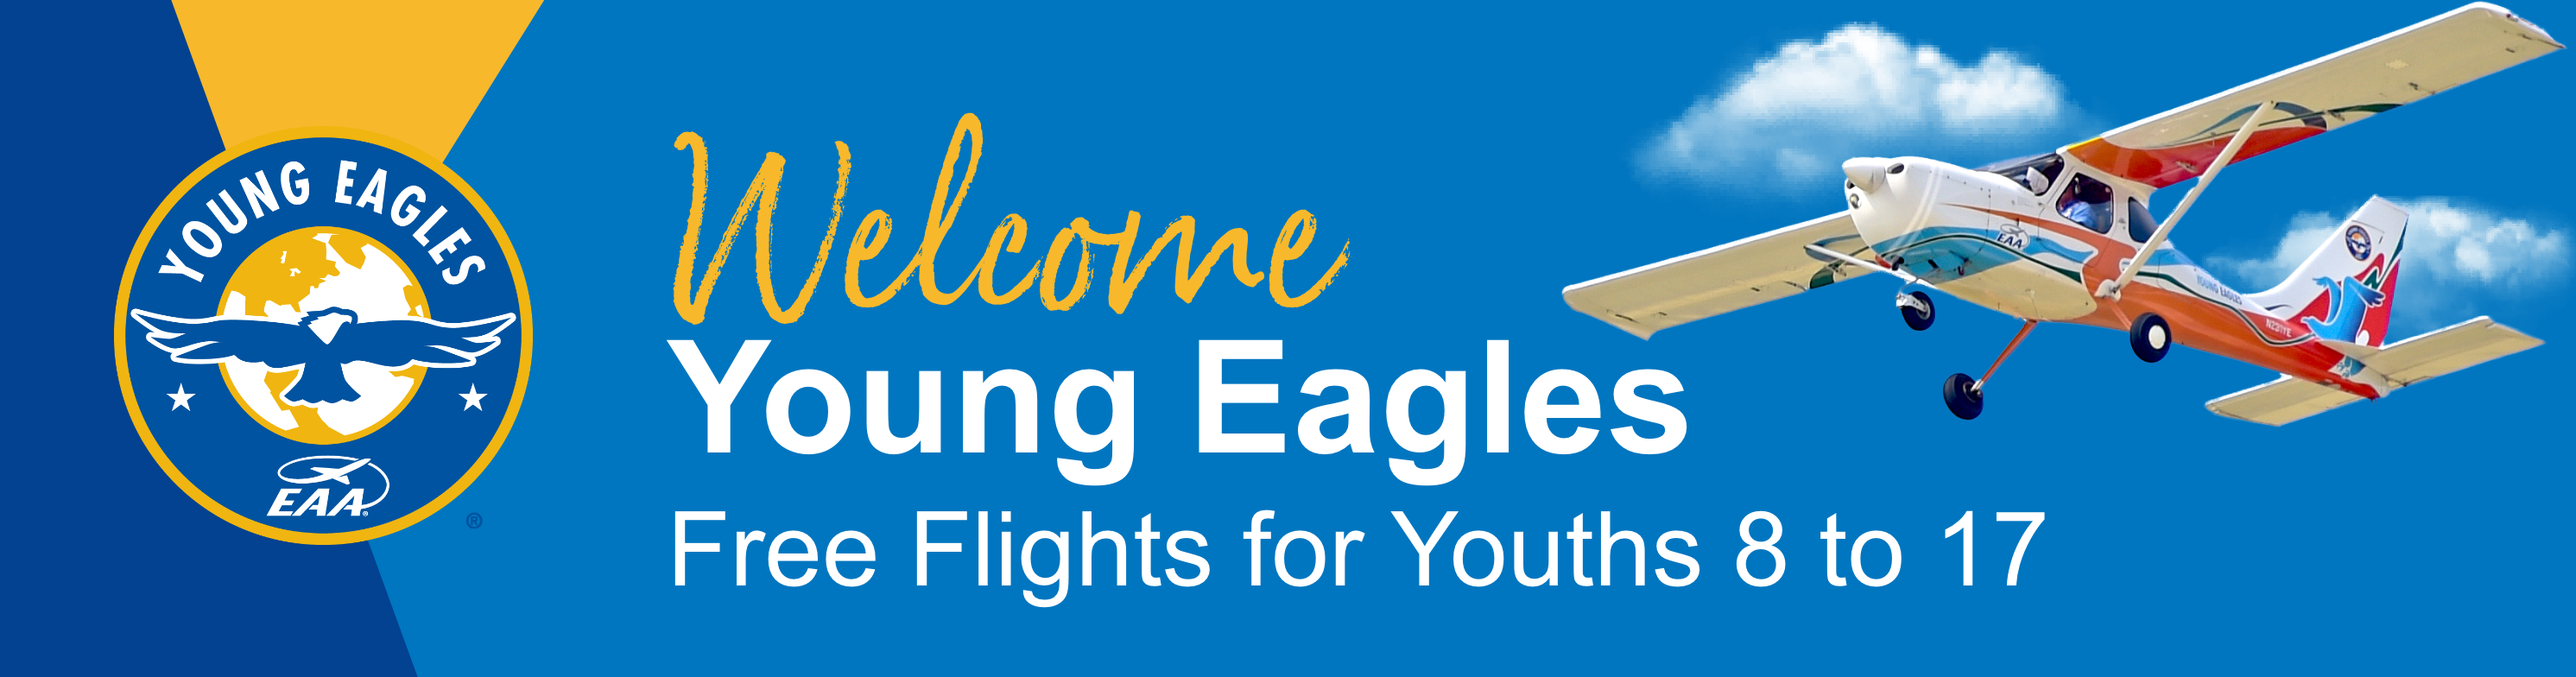 Welcome to the Young Eagles Day Website